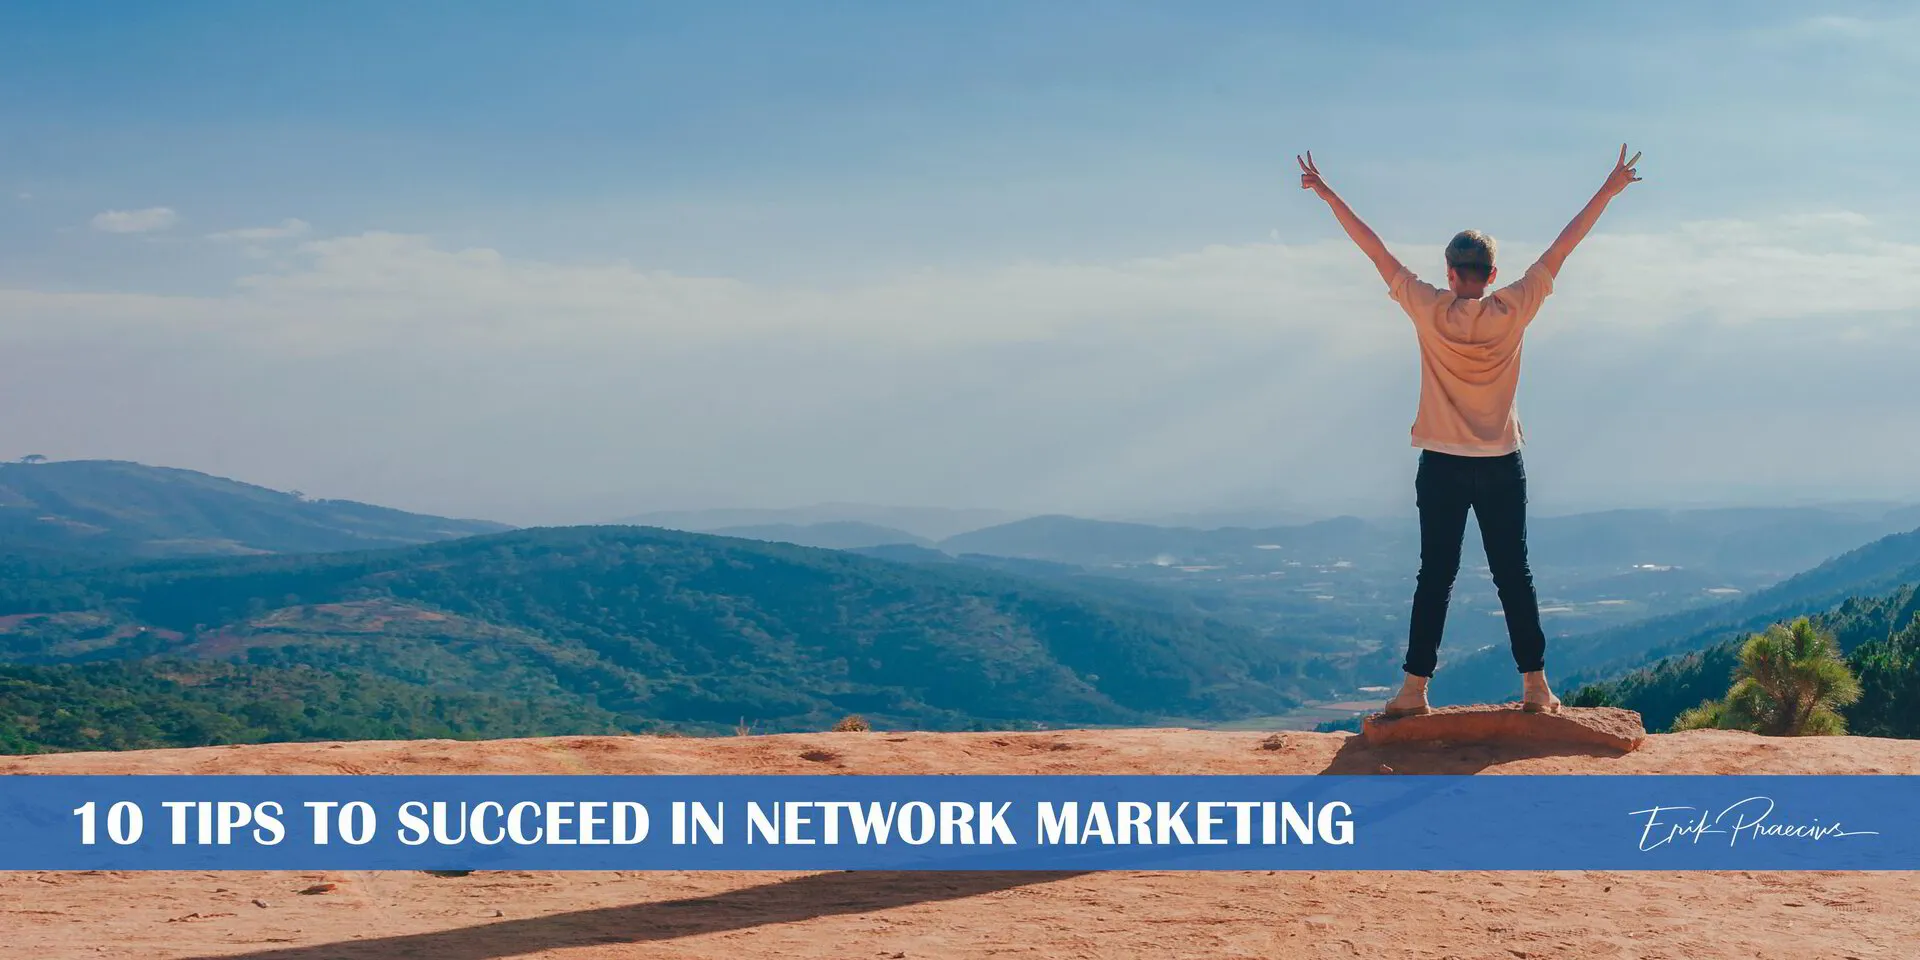 10 Tips to Succeed in Network Marketing According to the Experts